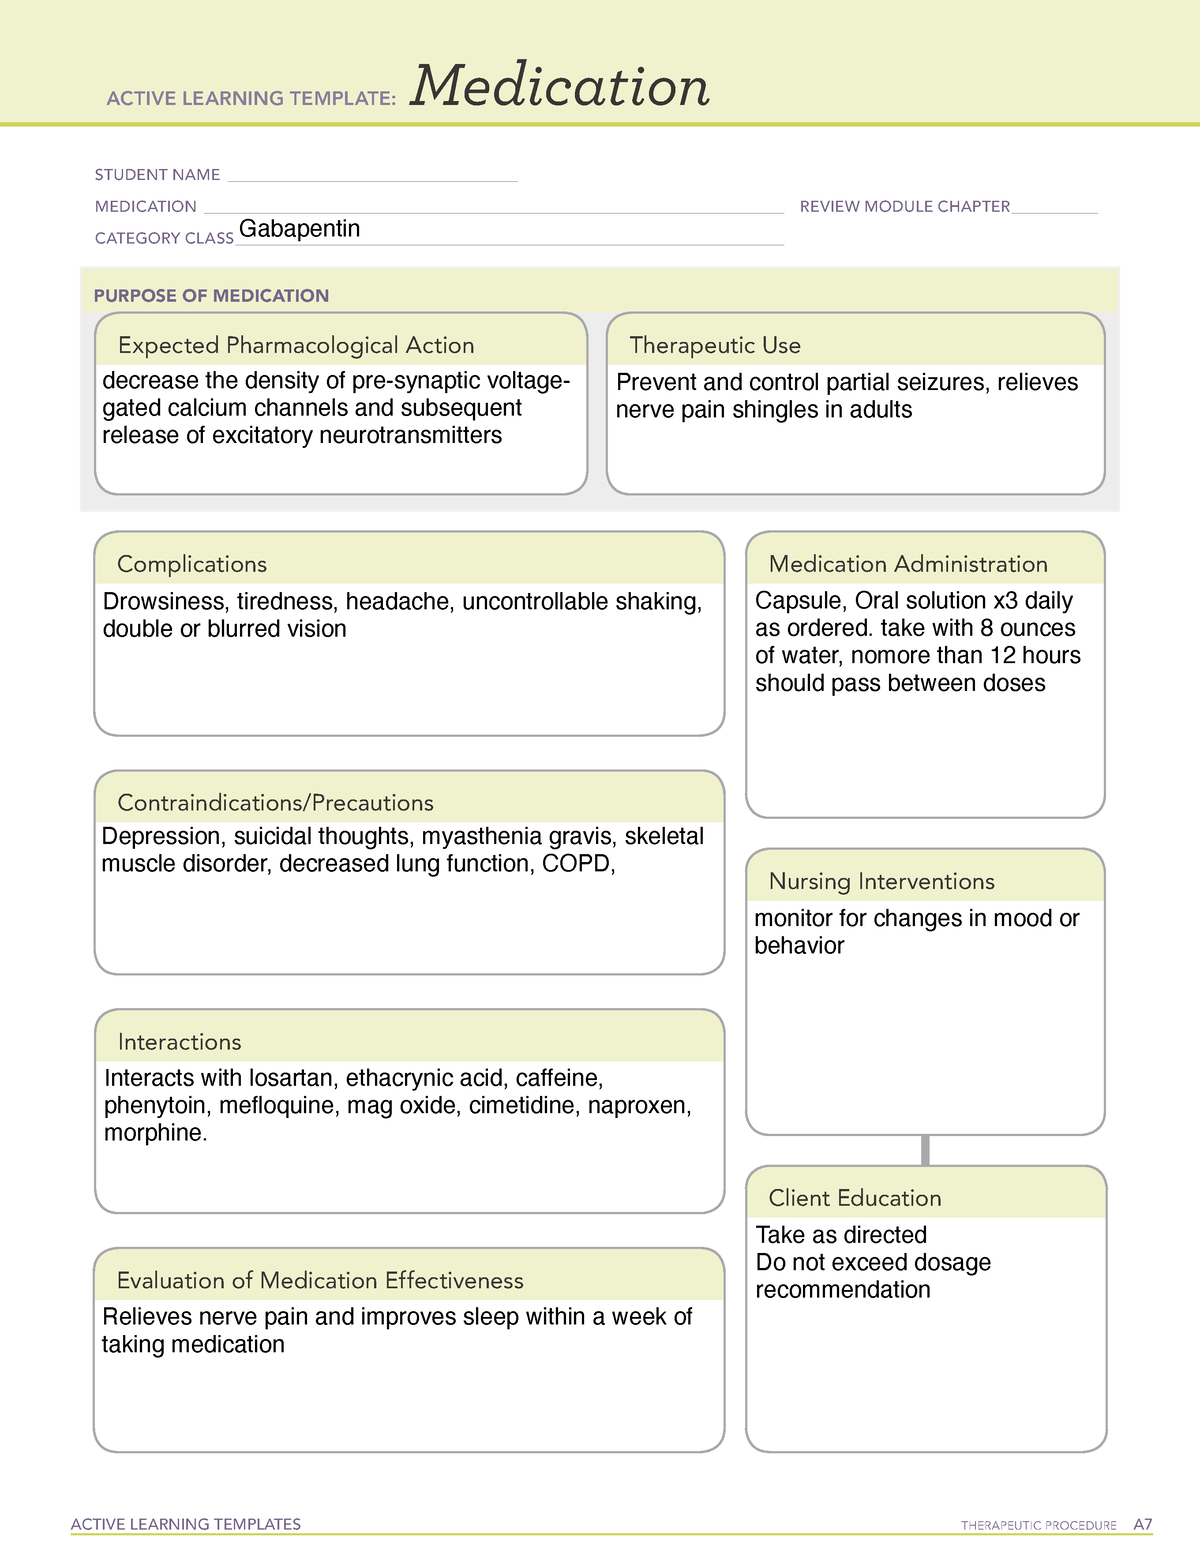 Gabapentin Medcard ACTIVE LEARNING TEMPLATES THERAPEUTIC PROCEDURE